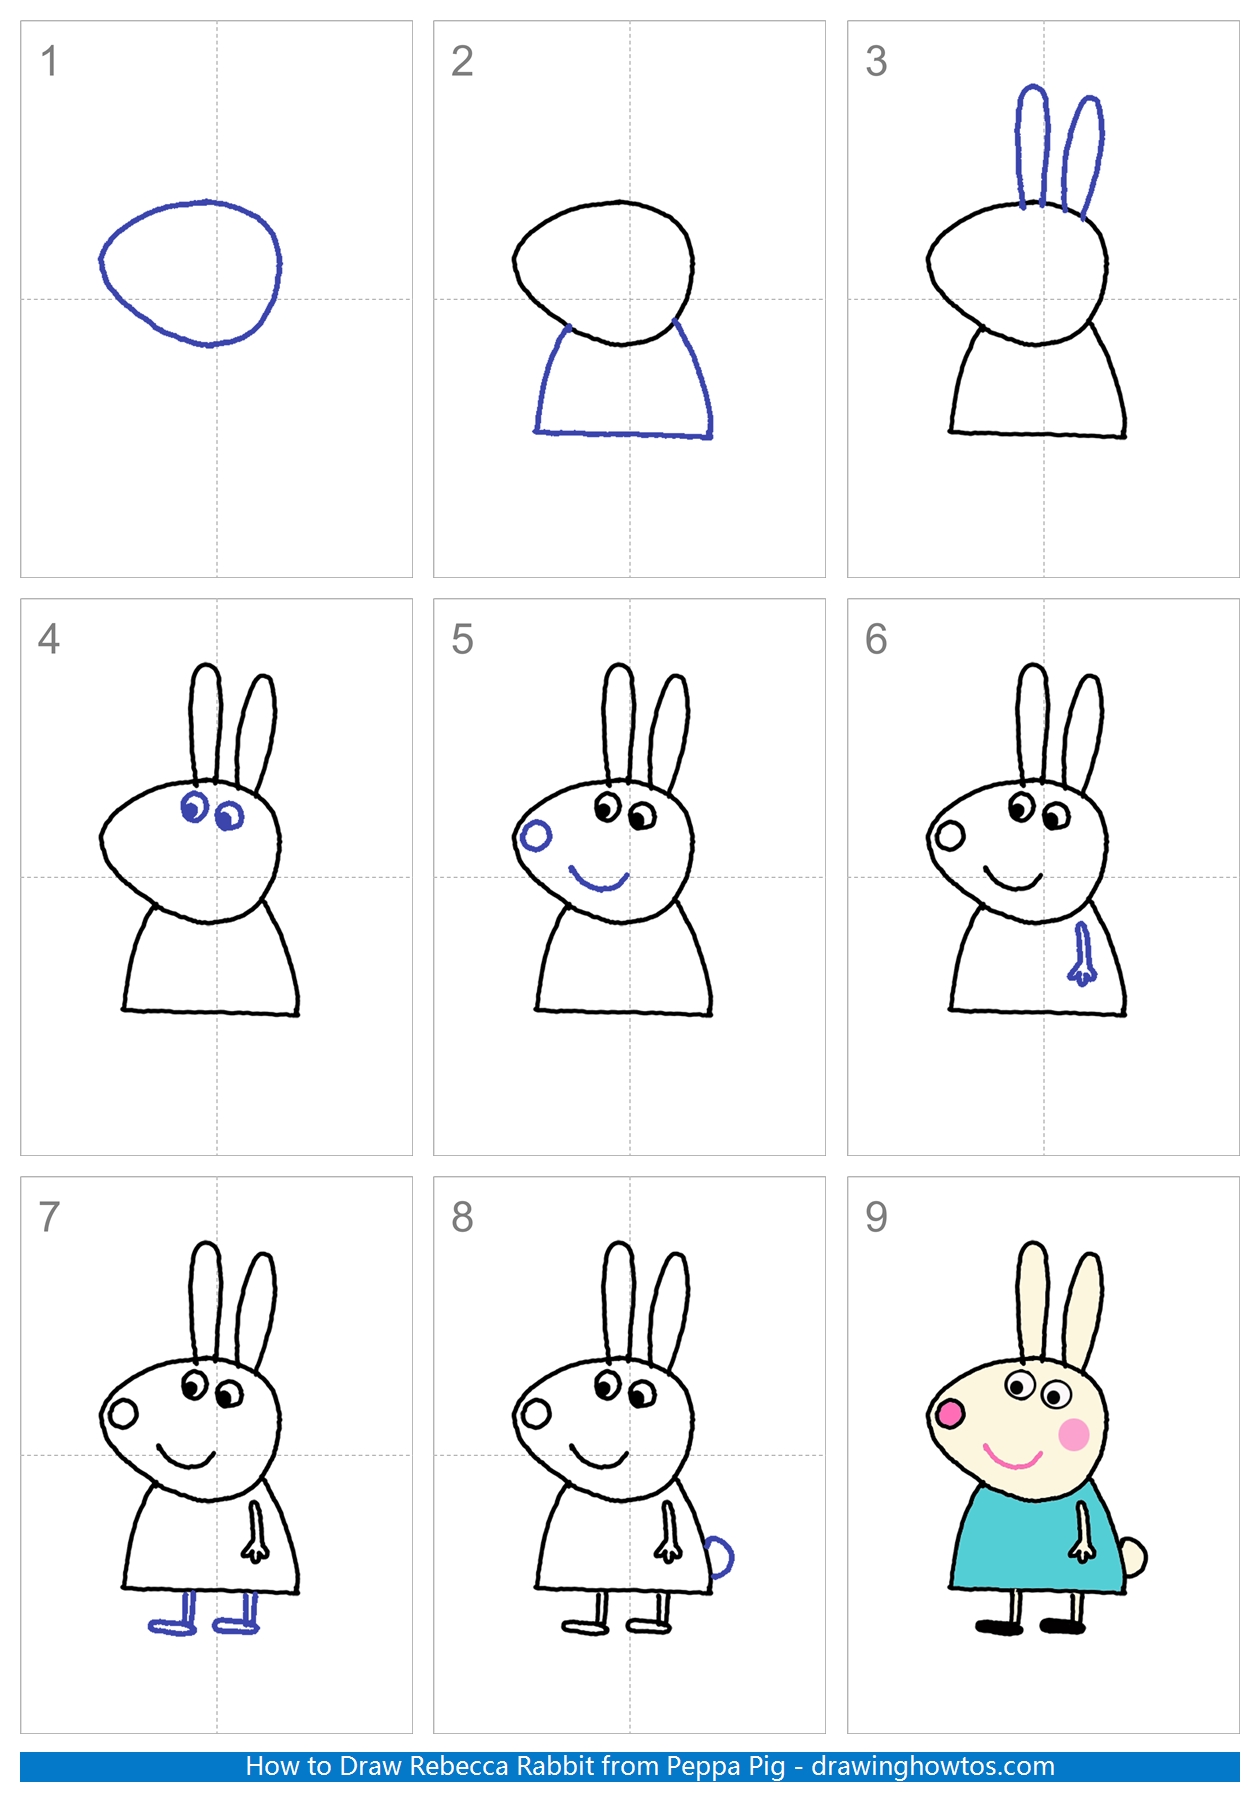 How to Draw Rebecca Rabbit from Peppa Pig Step by Step